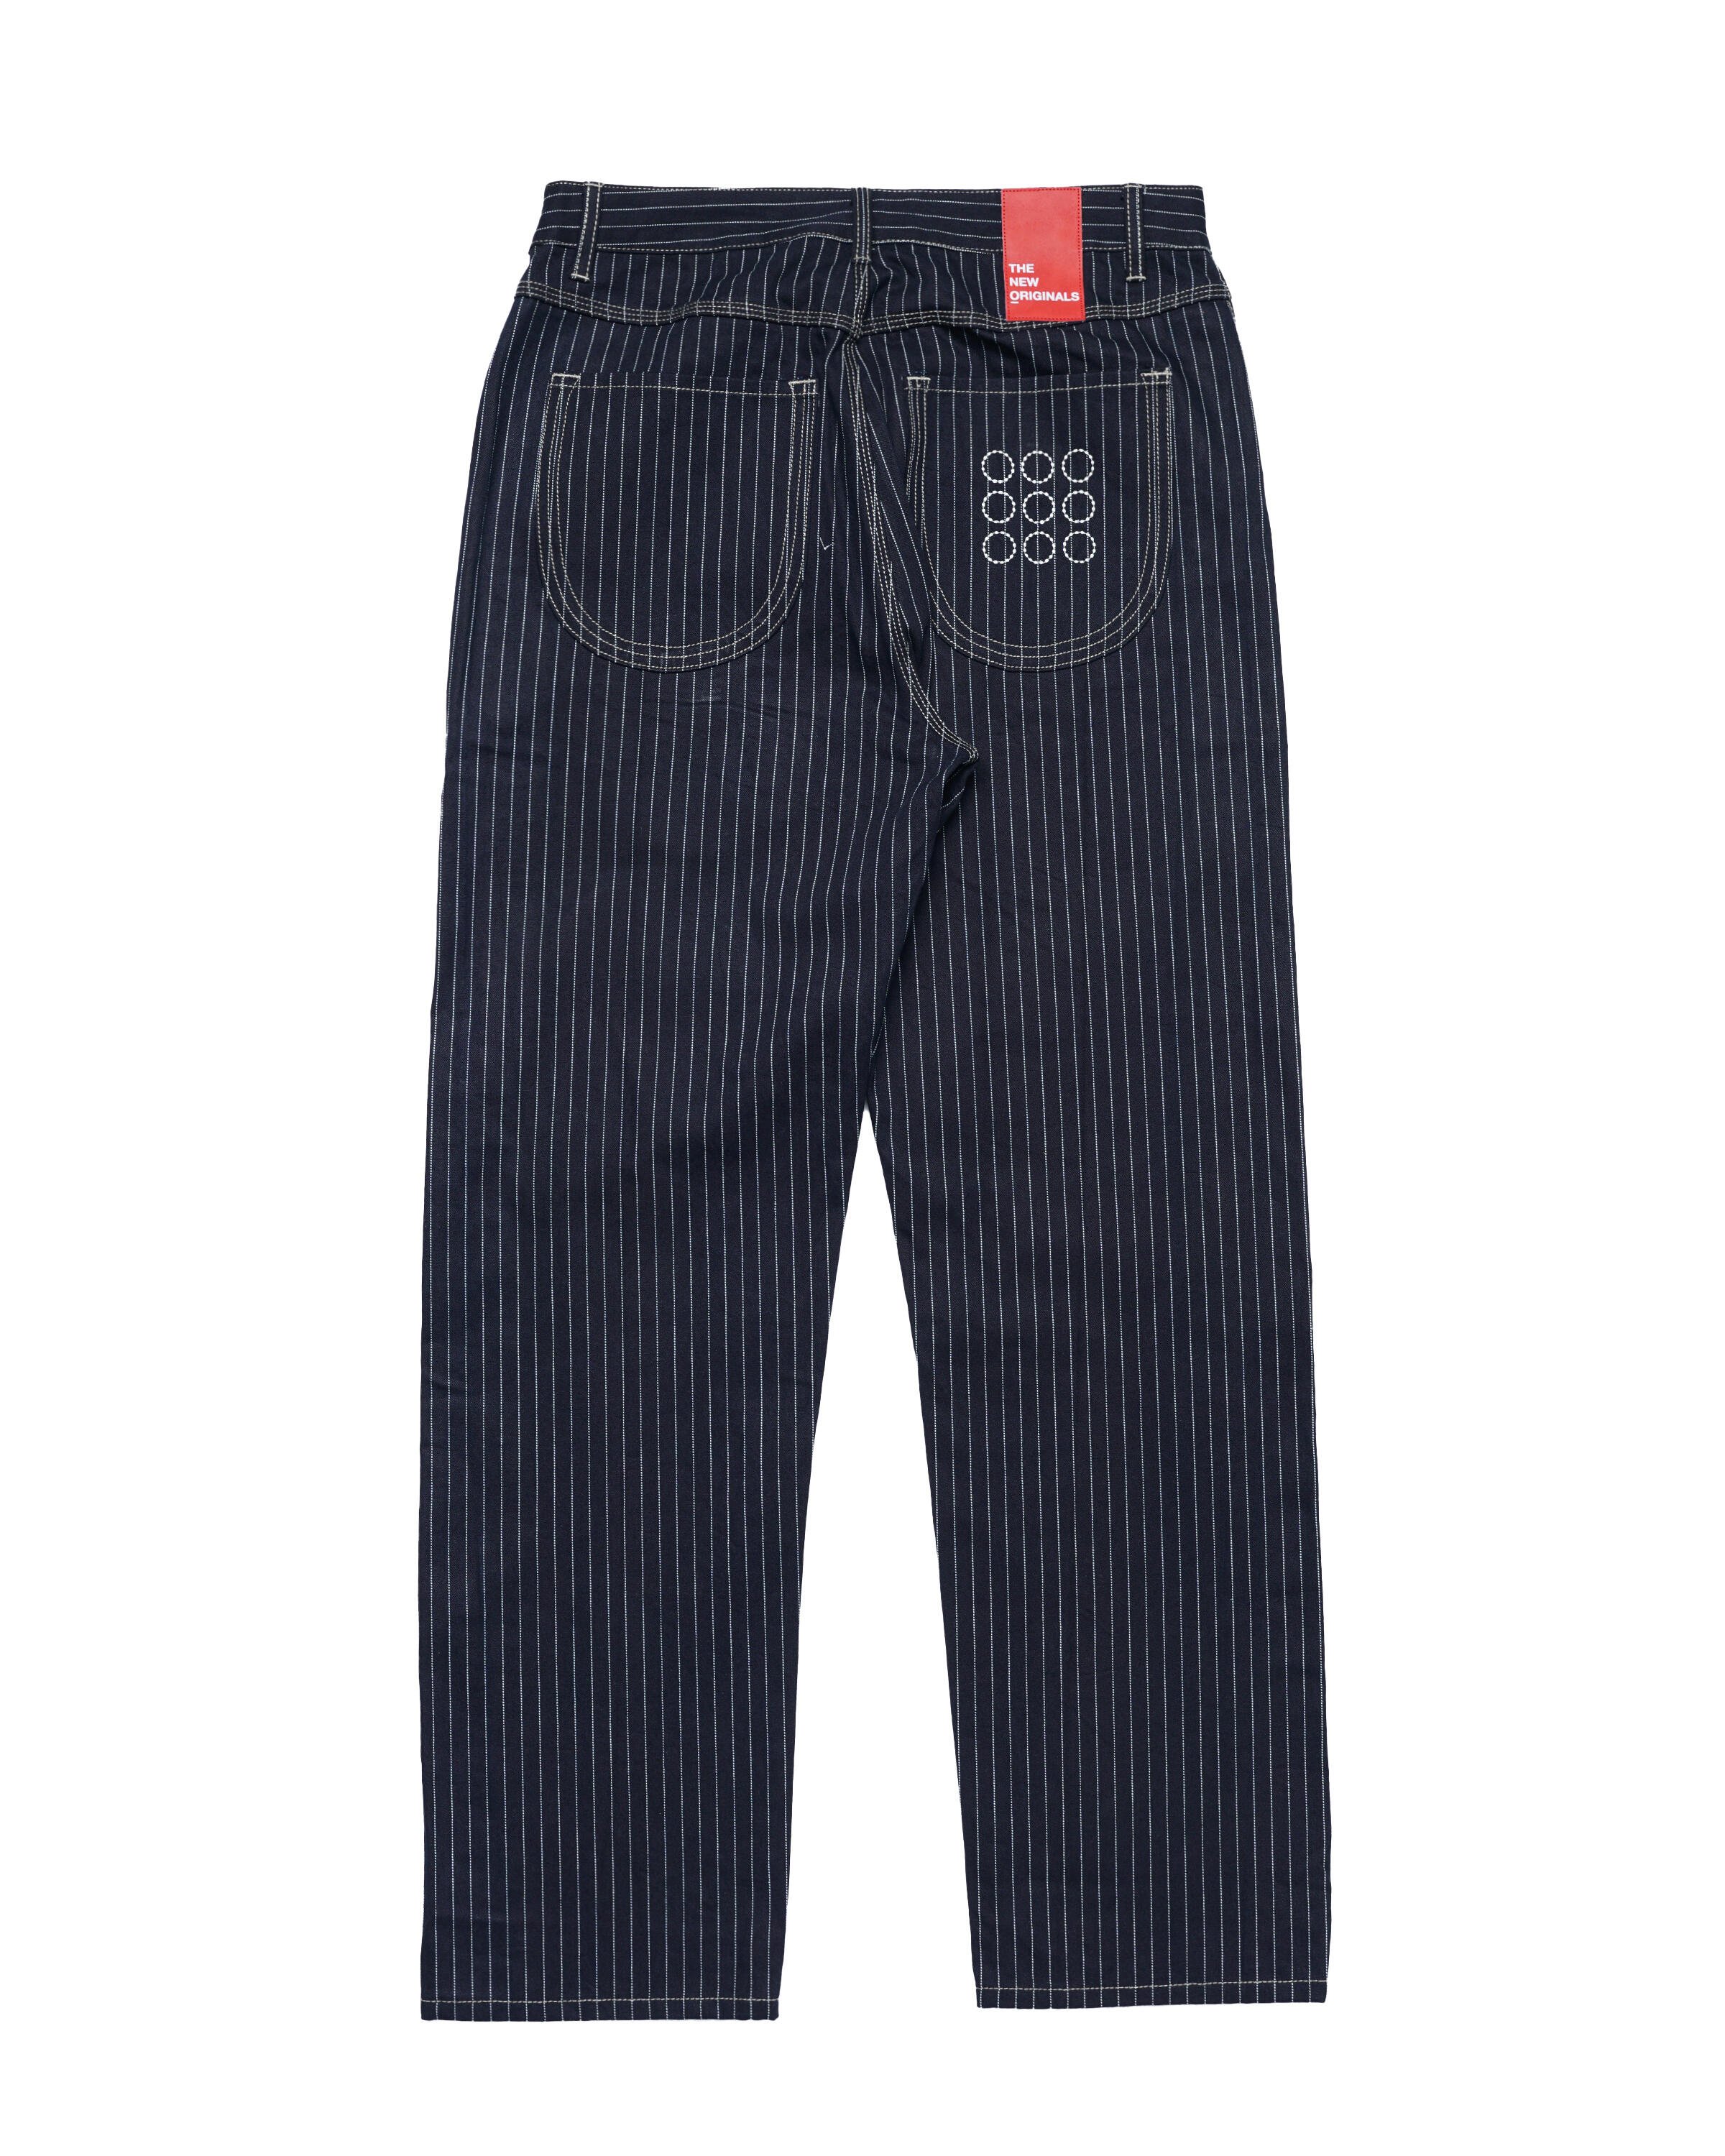 The New Originals 9-Dots Relaxed Jeans